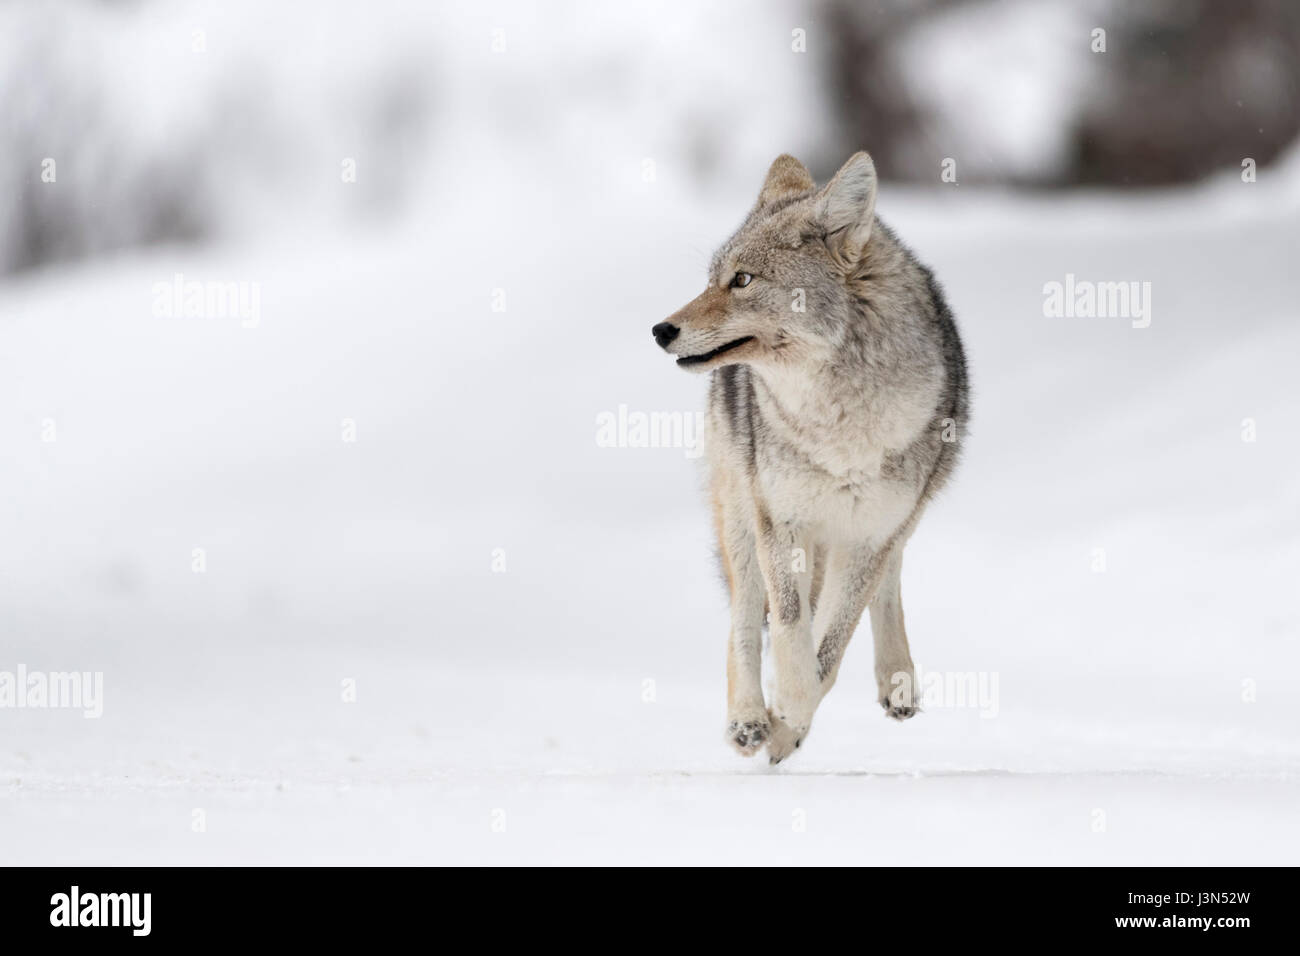 Coyote ( Canis latrans ) on the run, running, in winter, high snow, fleeing, looks scared, frightened, frontal shot, funny, Yellowstone NP, USA. Stock Photo